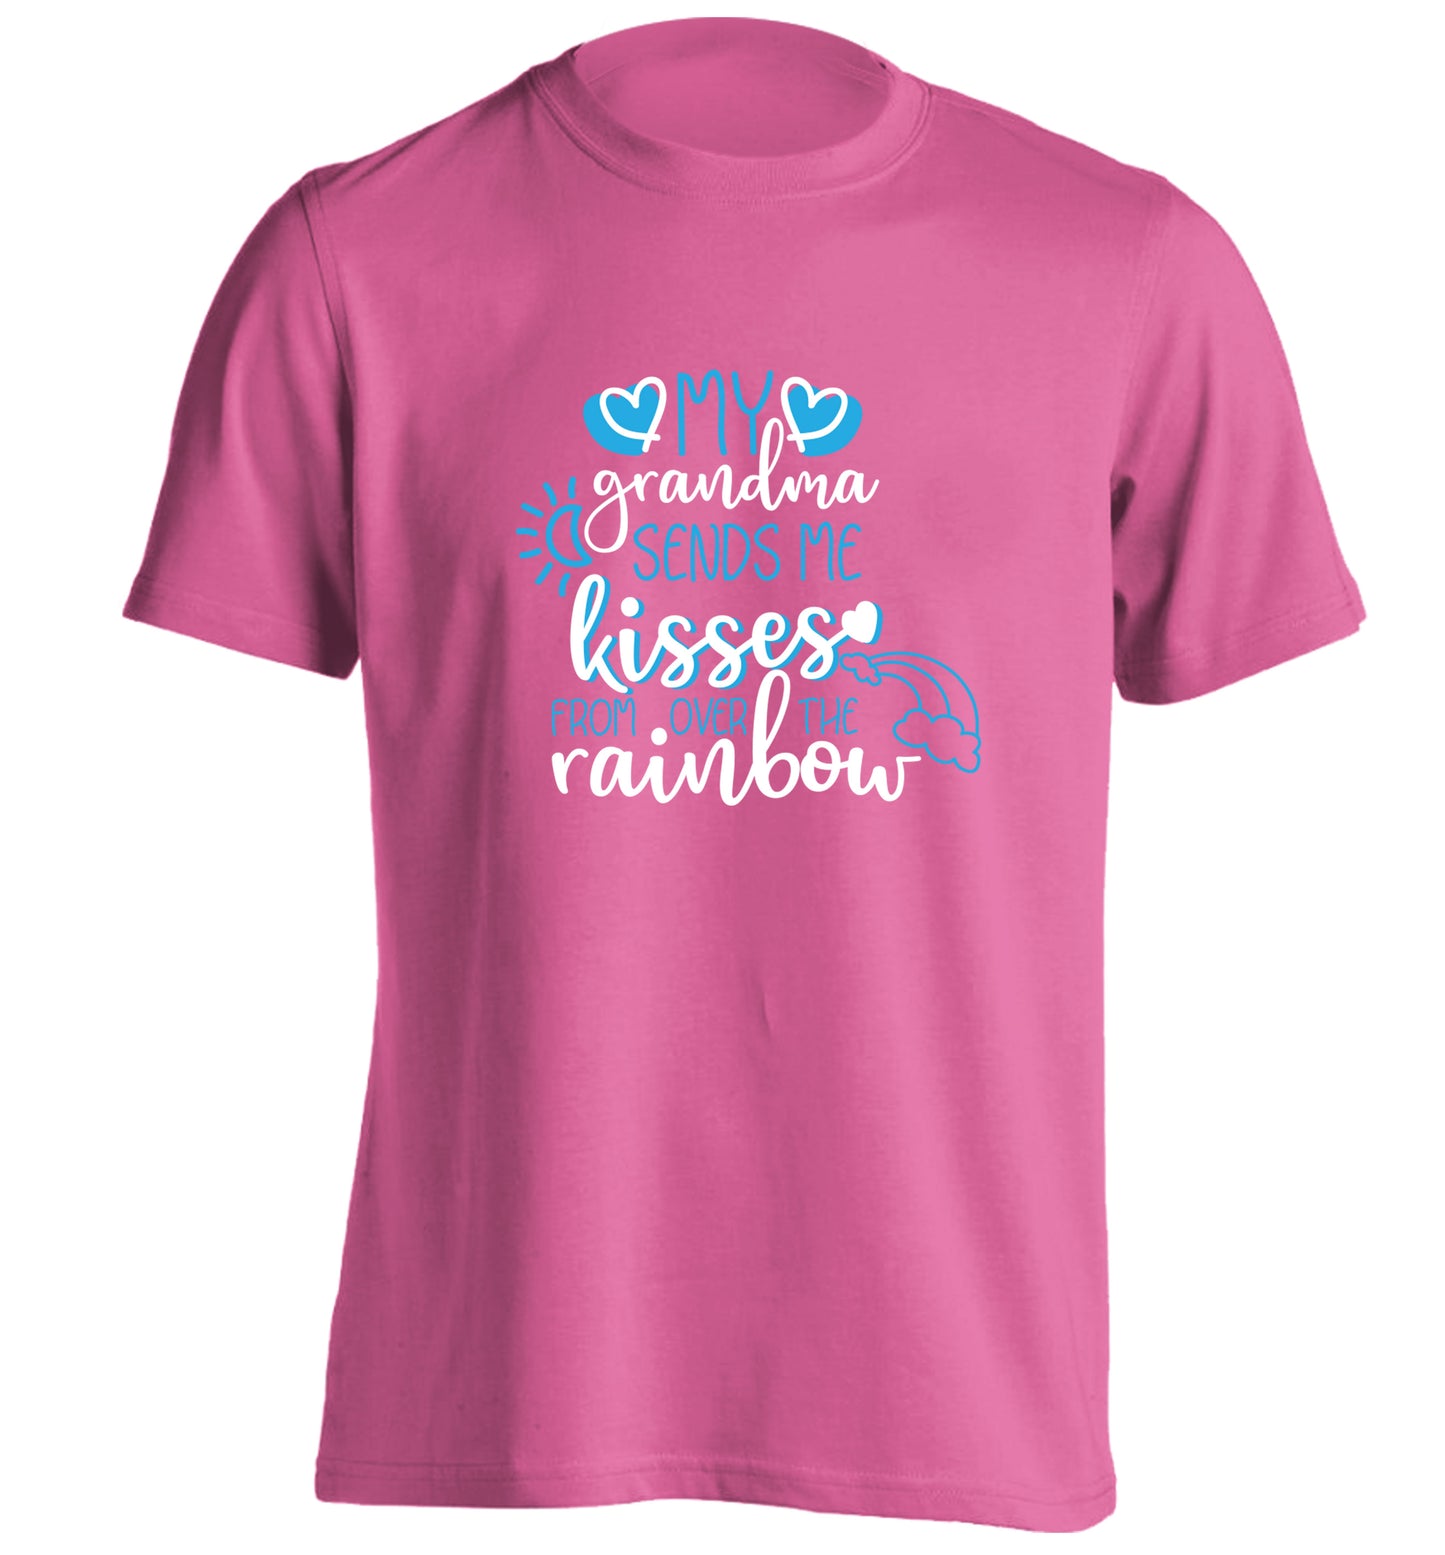 My grandma sends me kisses from over the rainbow adults unisex pink Tshirt 2XL